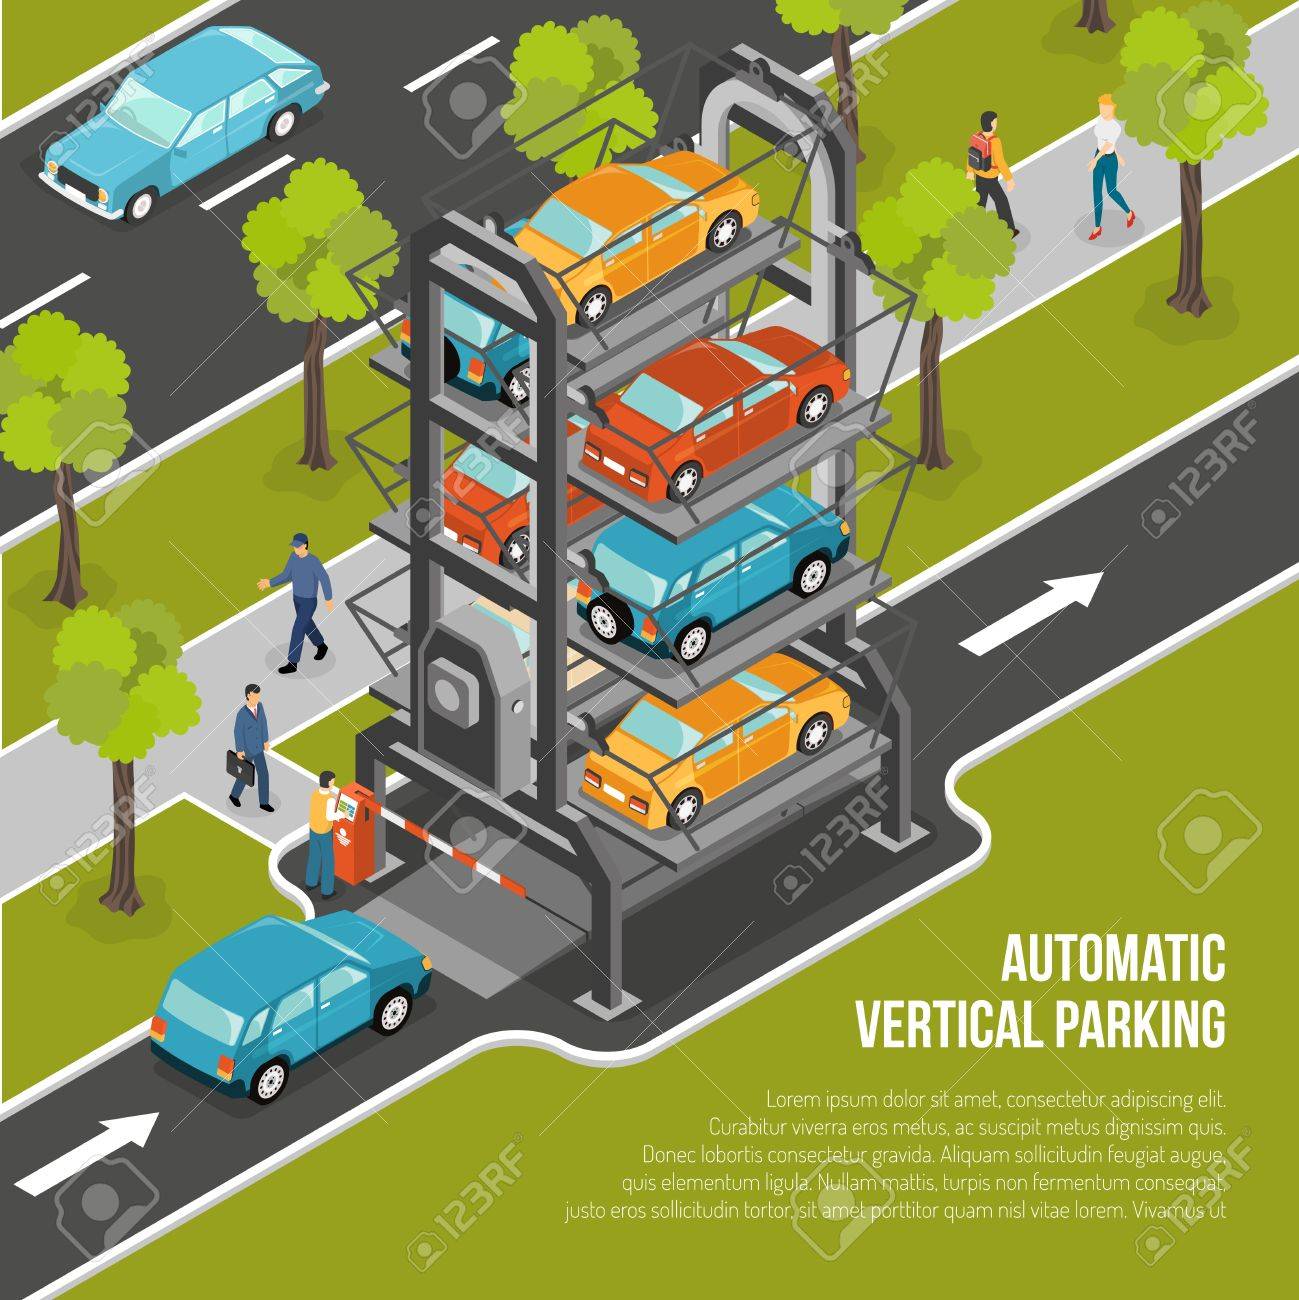 79039988-car-parking-poster-or-flyer-with-automatic-vertical-parking-located-in-the-city-vector-illustration.jpg